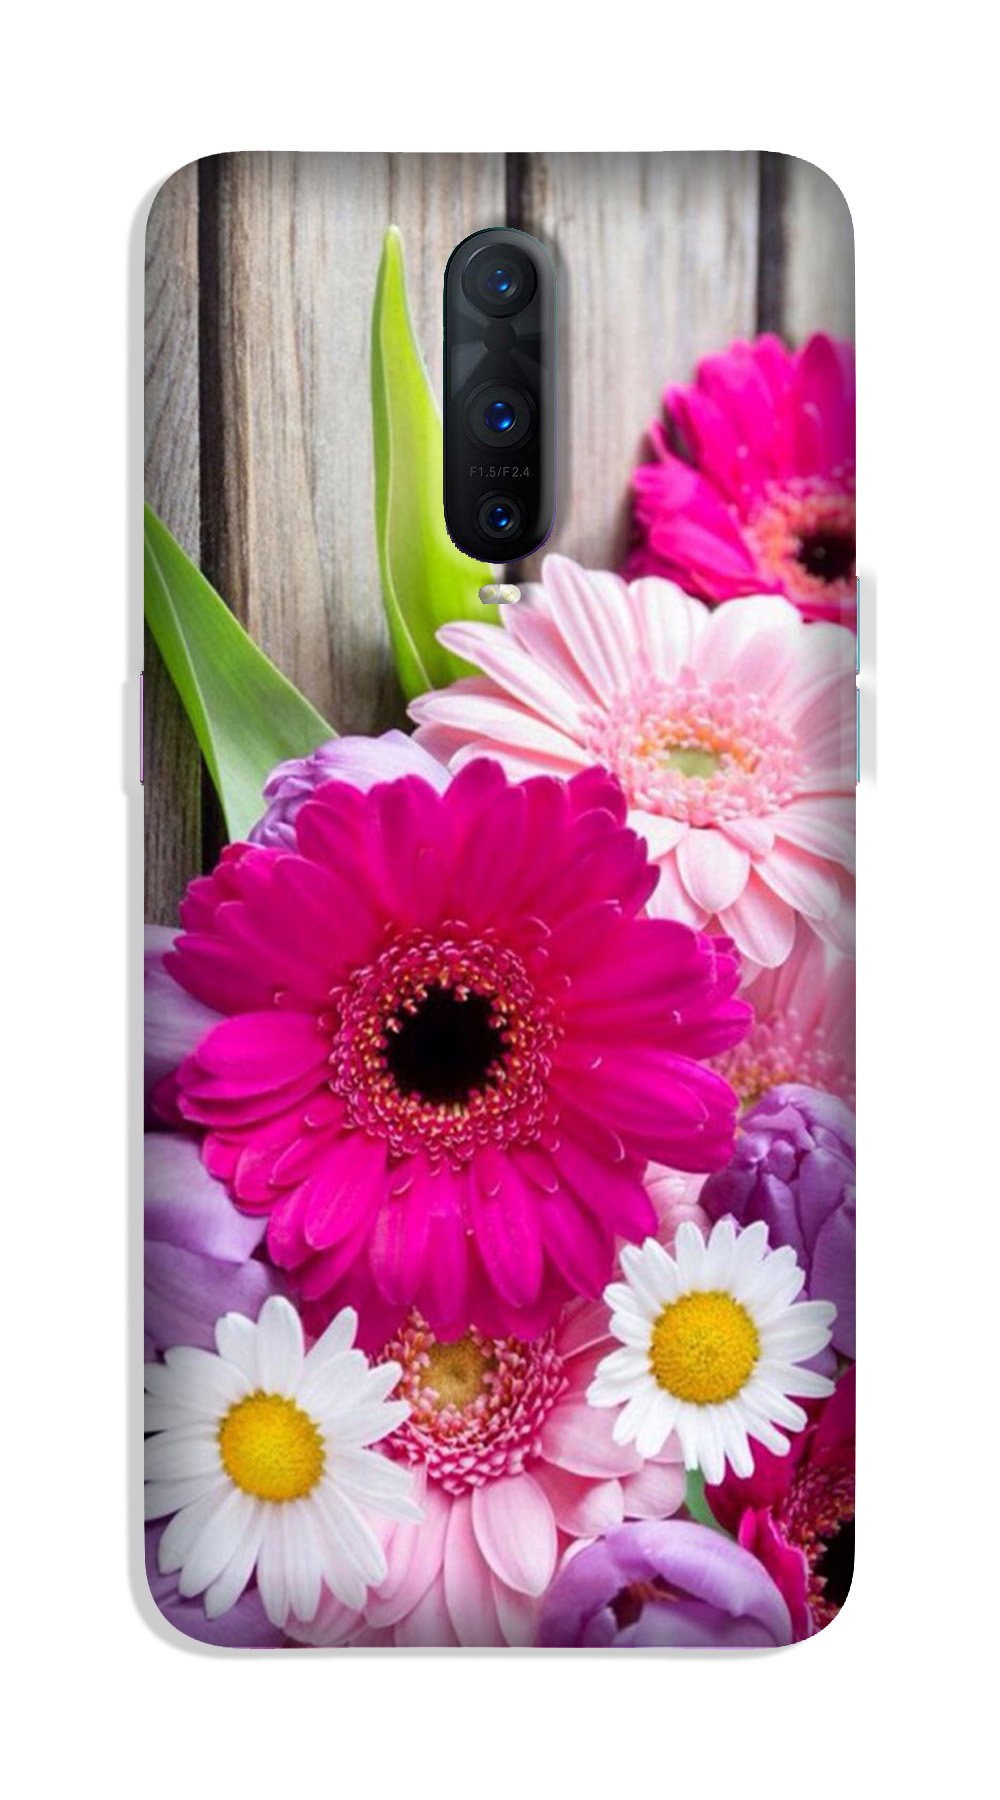 Coloful Daisy2 Case for OnePlus 7 Pro